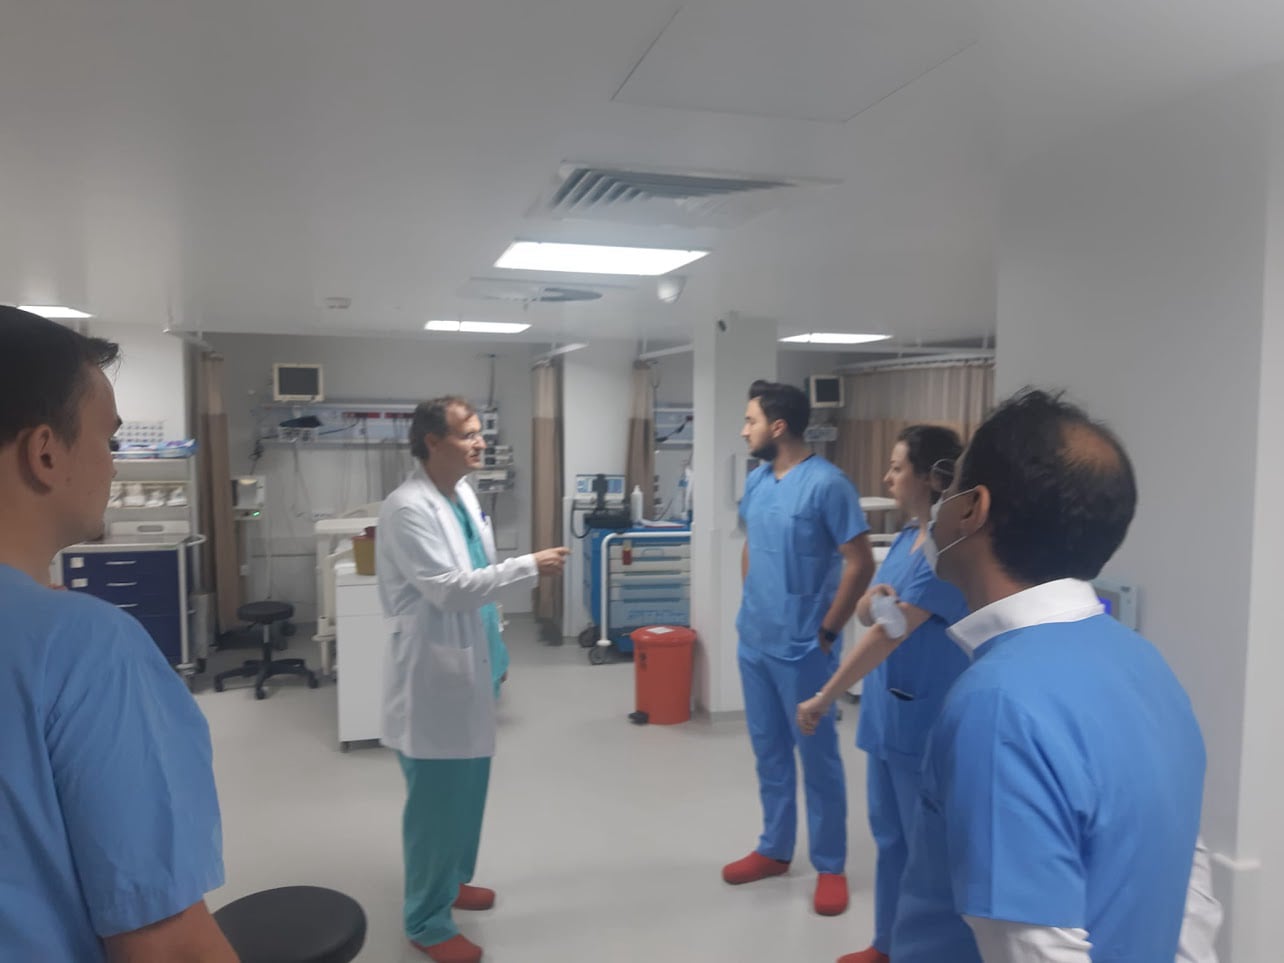 Health Innovation Project application and observation in the hospital